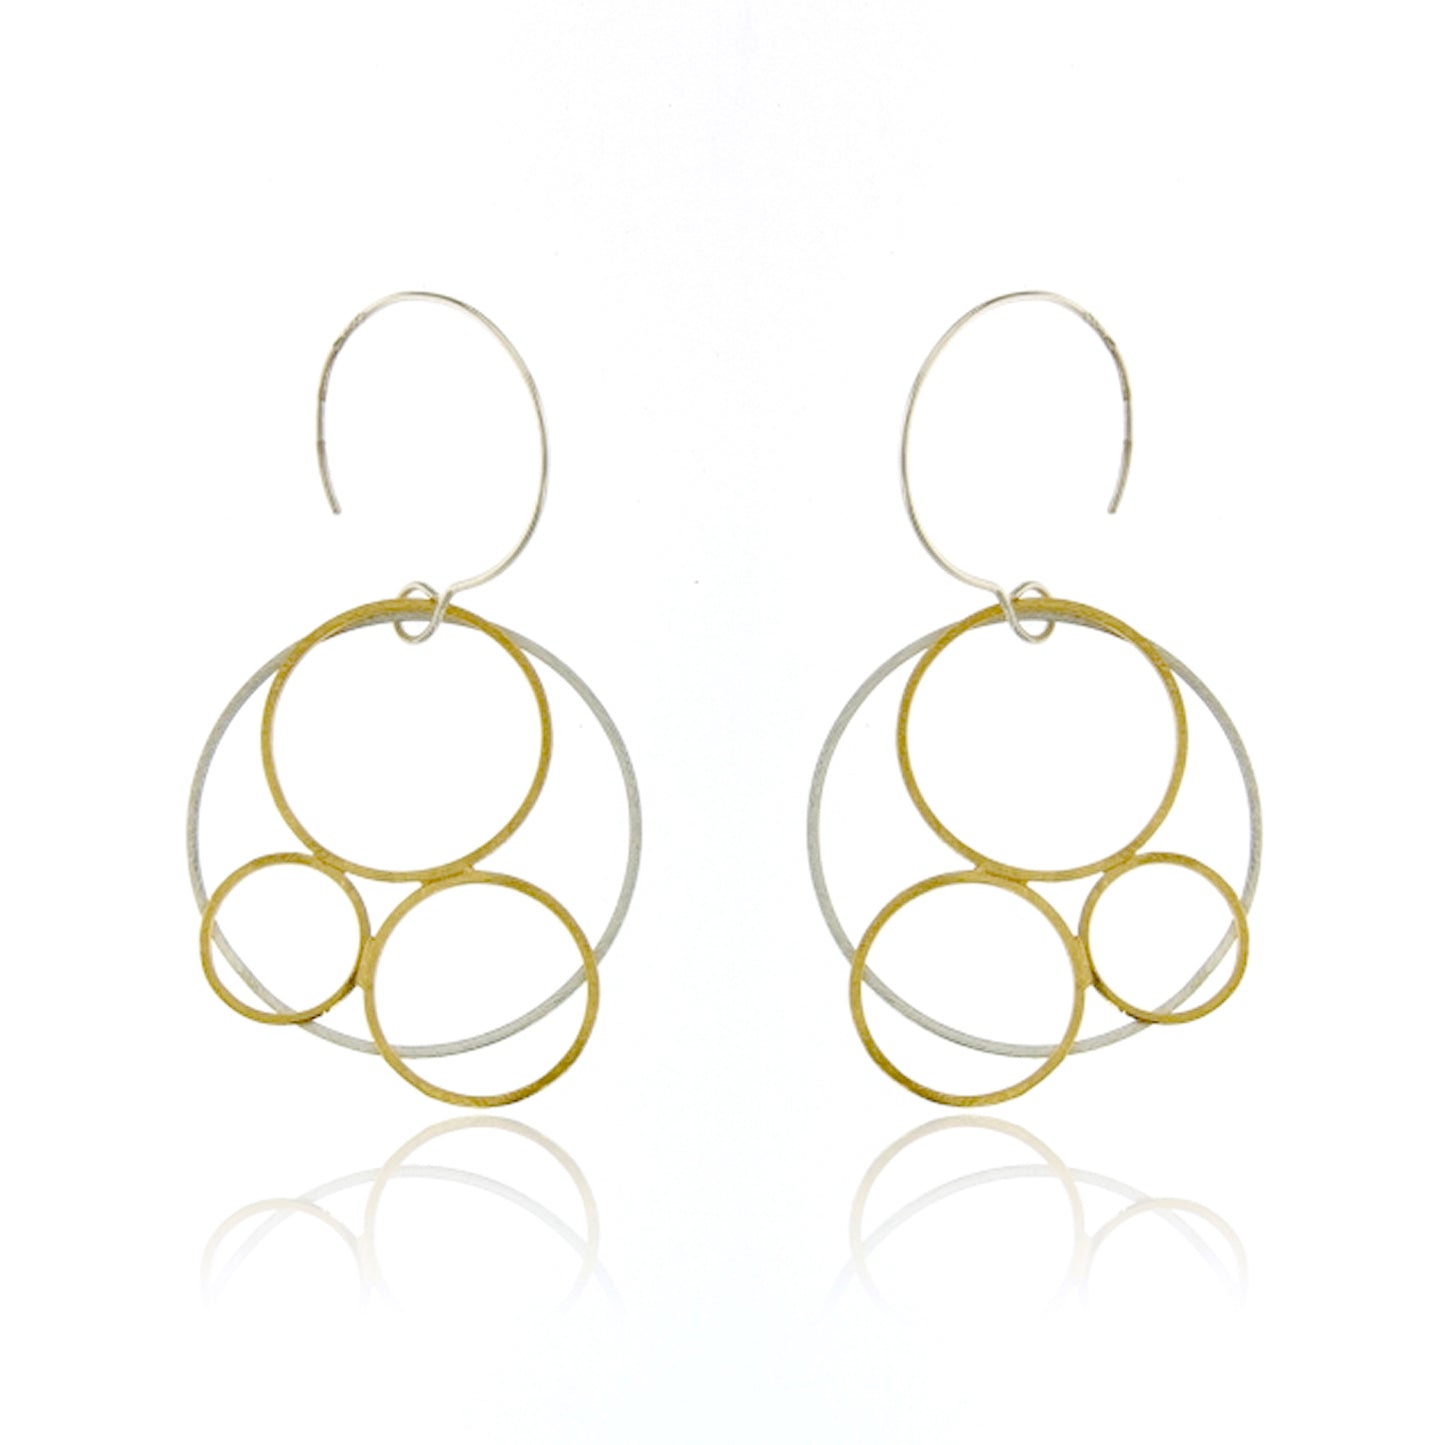 Mysterium Collection Sterling & Vermeil Circular Earrings